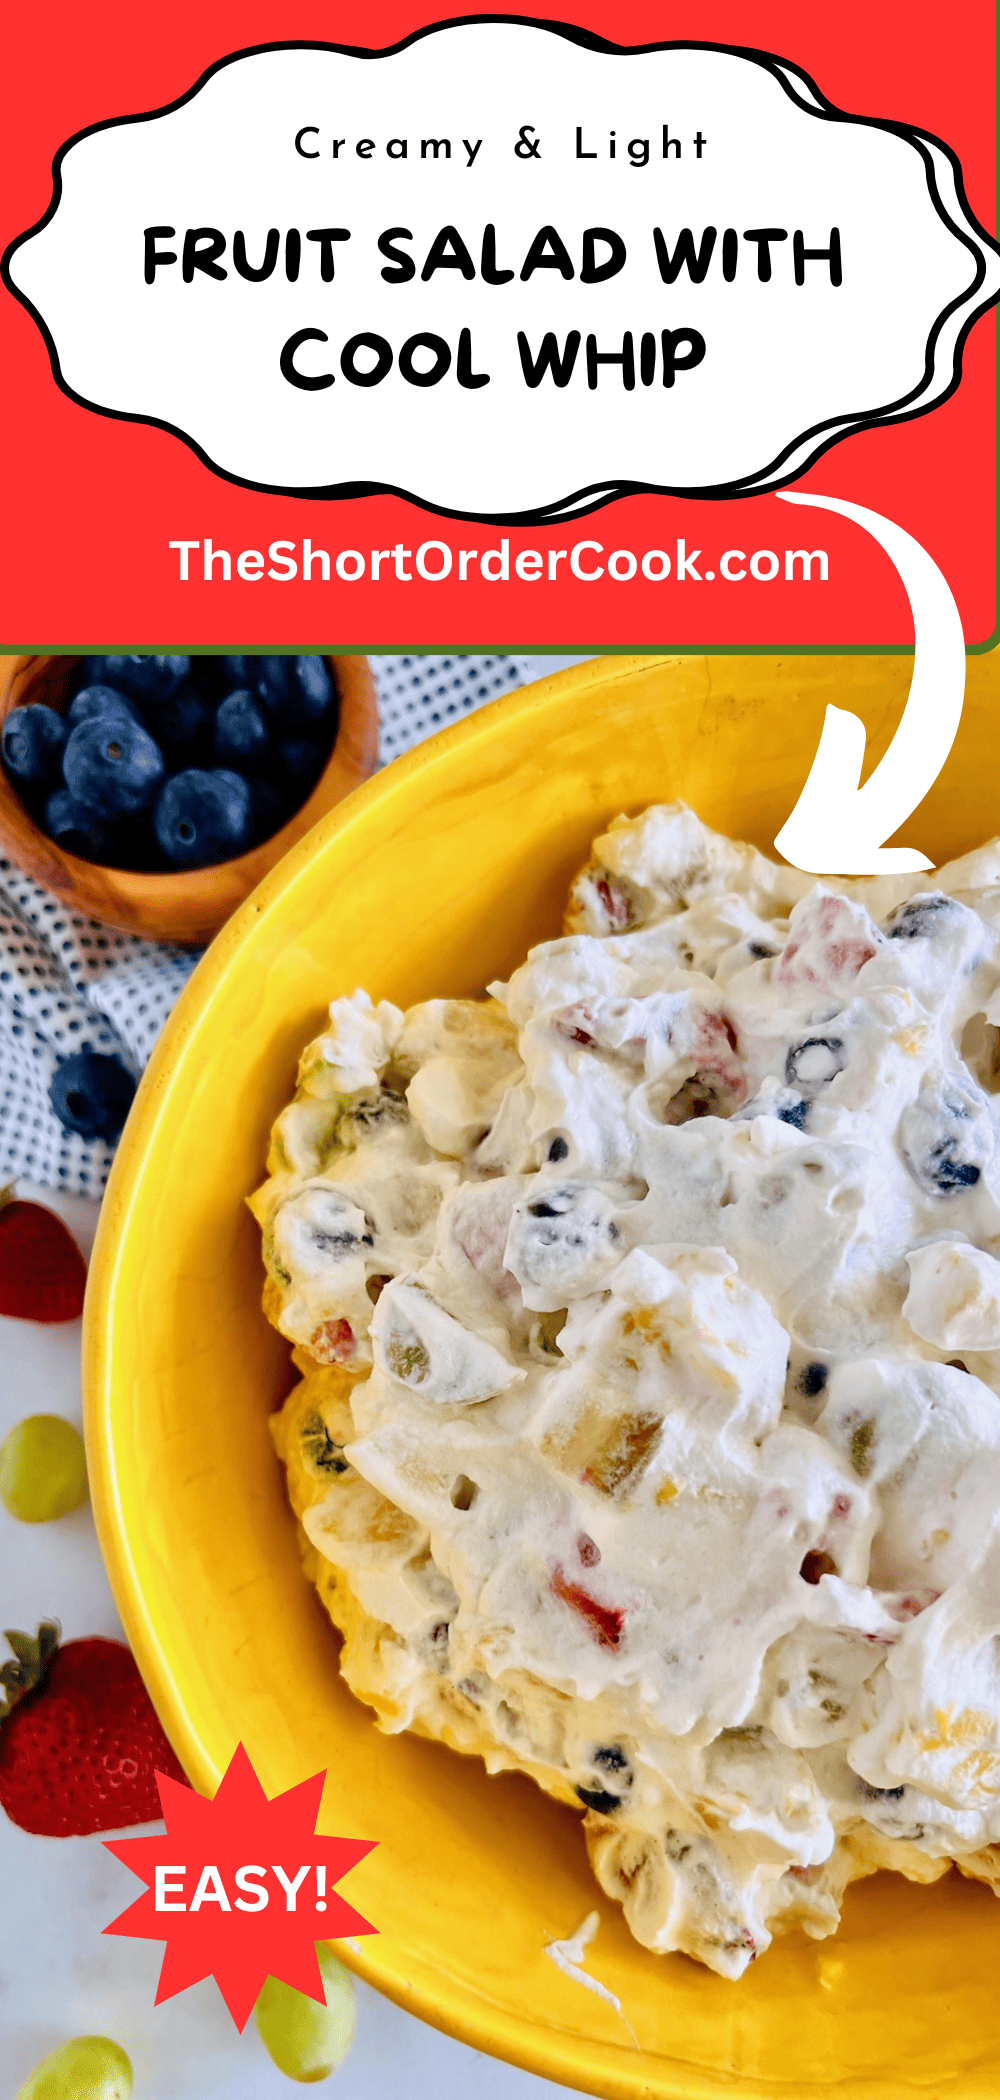 Cut fresh Fruit Salad with Cool Whip topping. 